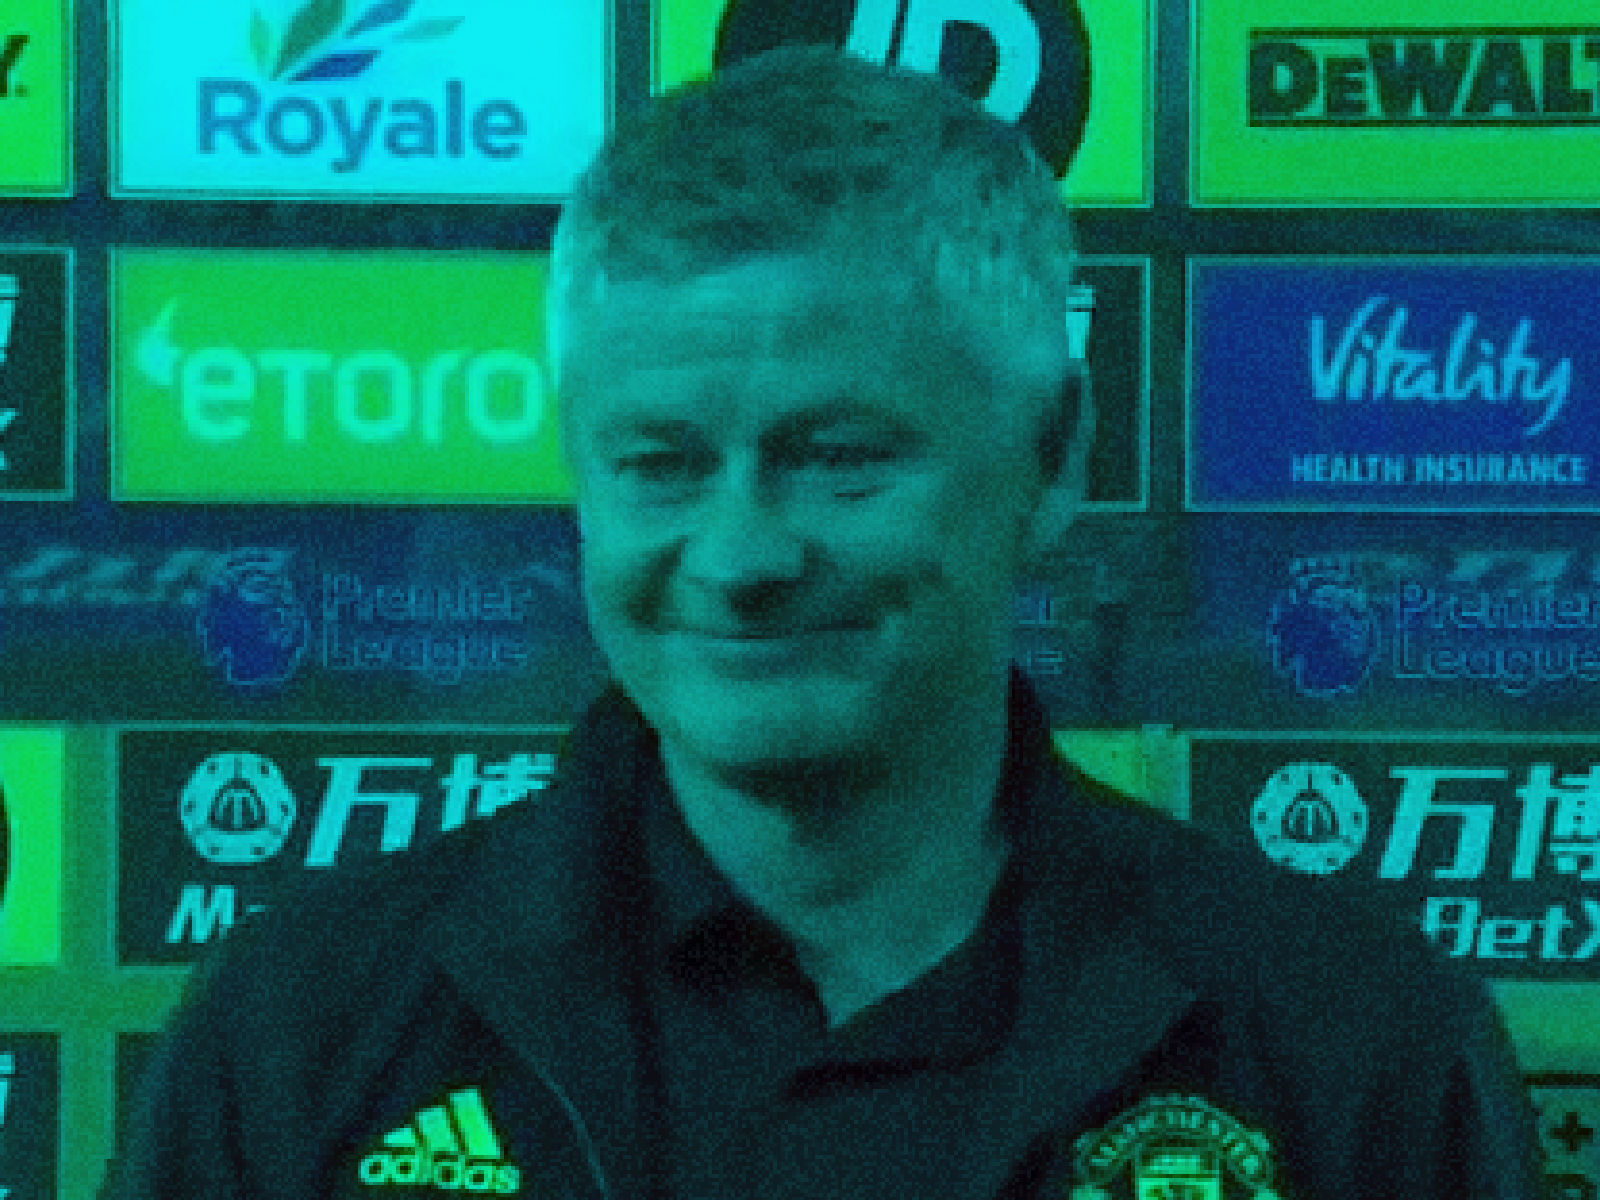 Solskjaer at his cheeky best when asked about Zaha penalty claim after Palace win